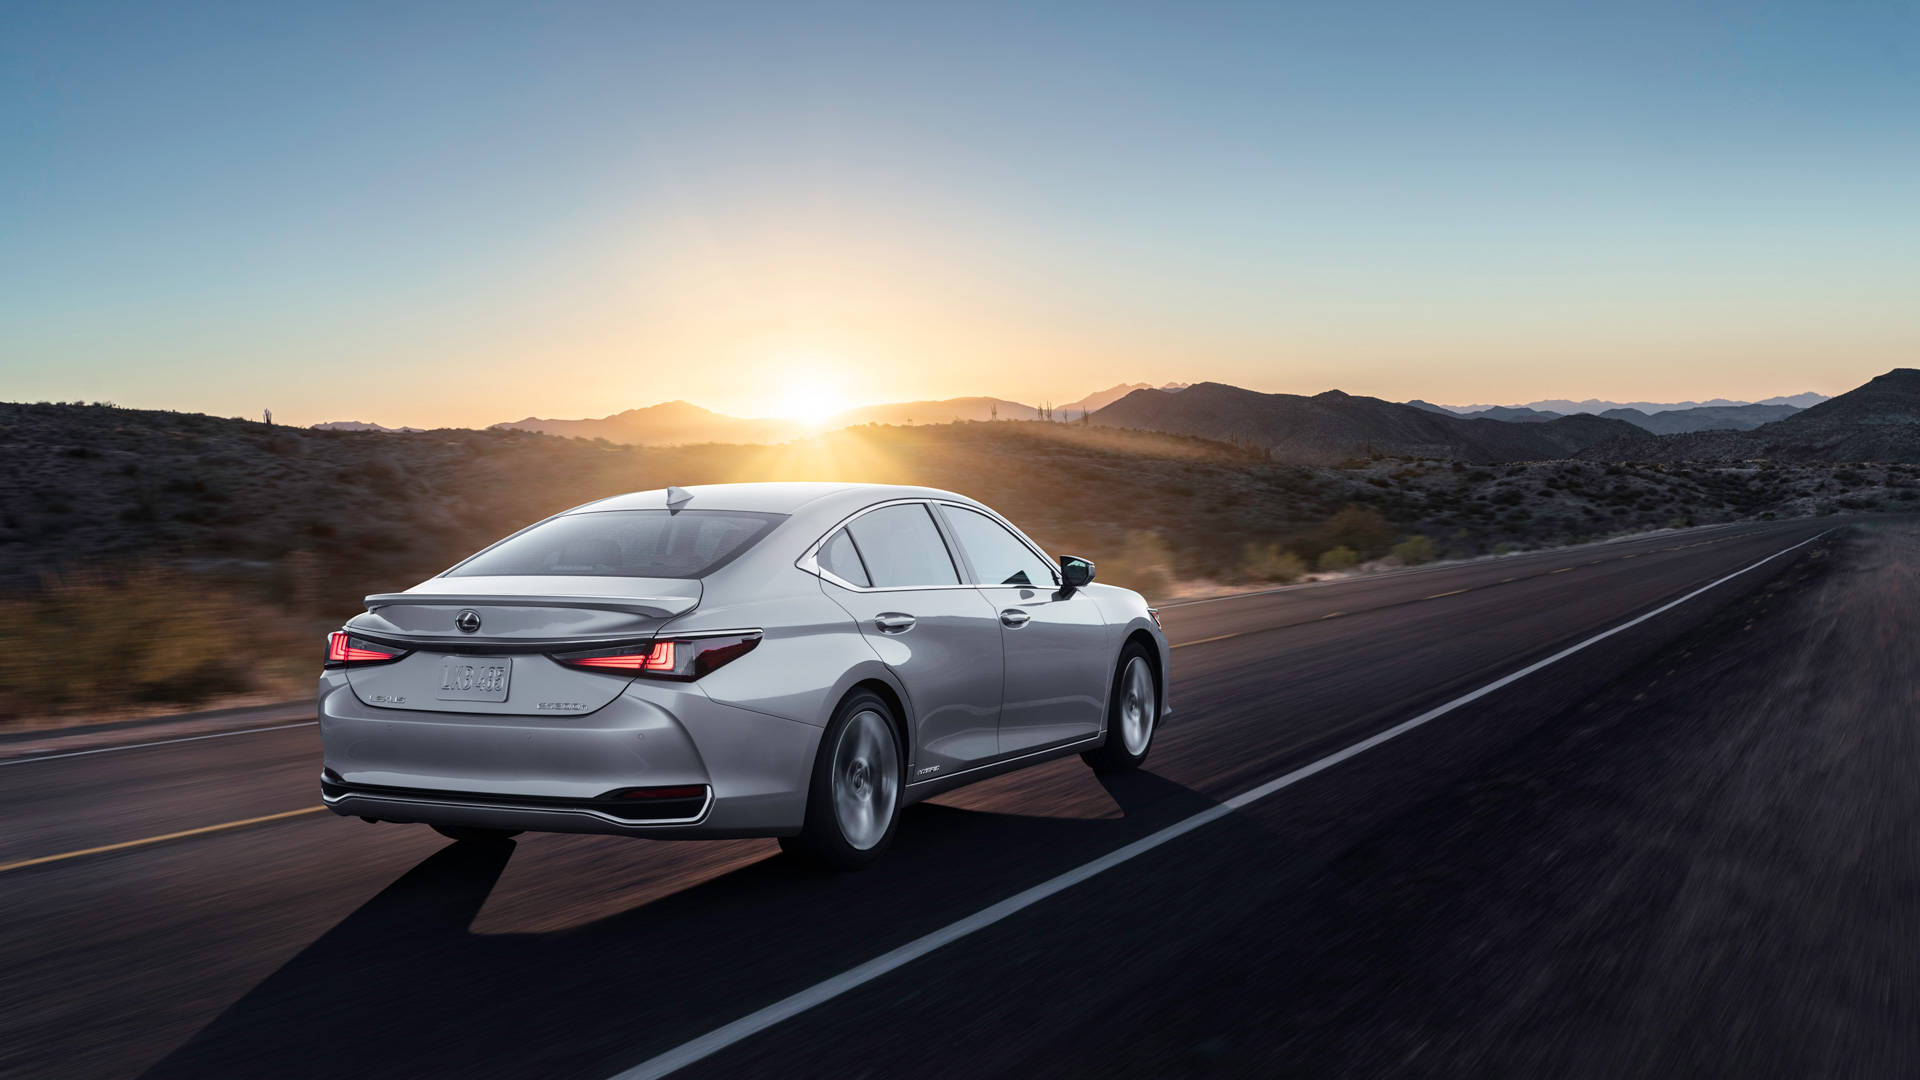 The Lexus ES On the Road - Rear view